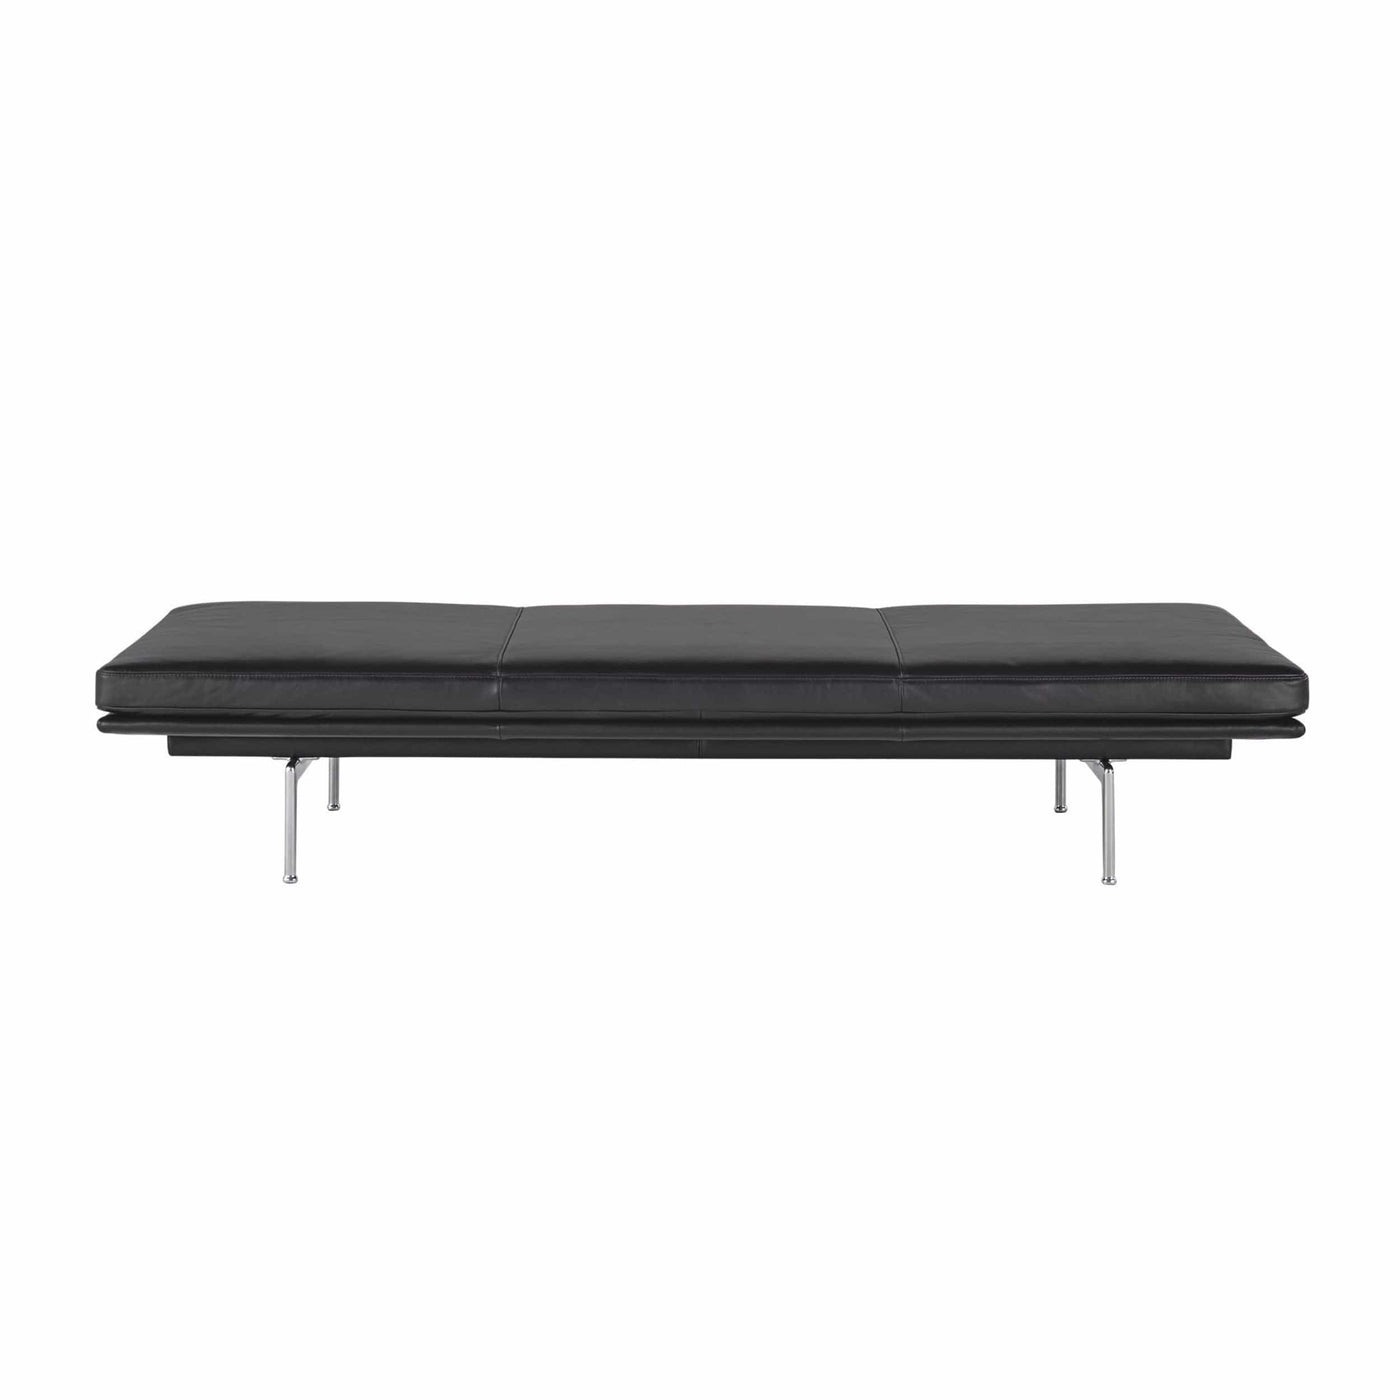 Muuto Outline Daybed in black refine leather and polished aluminium legs. Made to order from someday designs. #colour_black-refine-leather